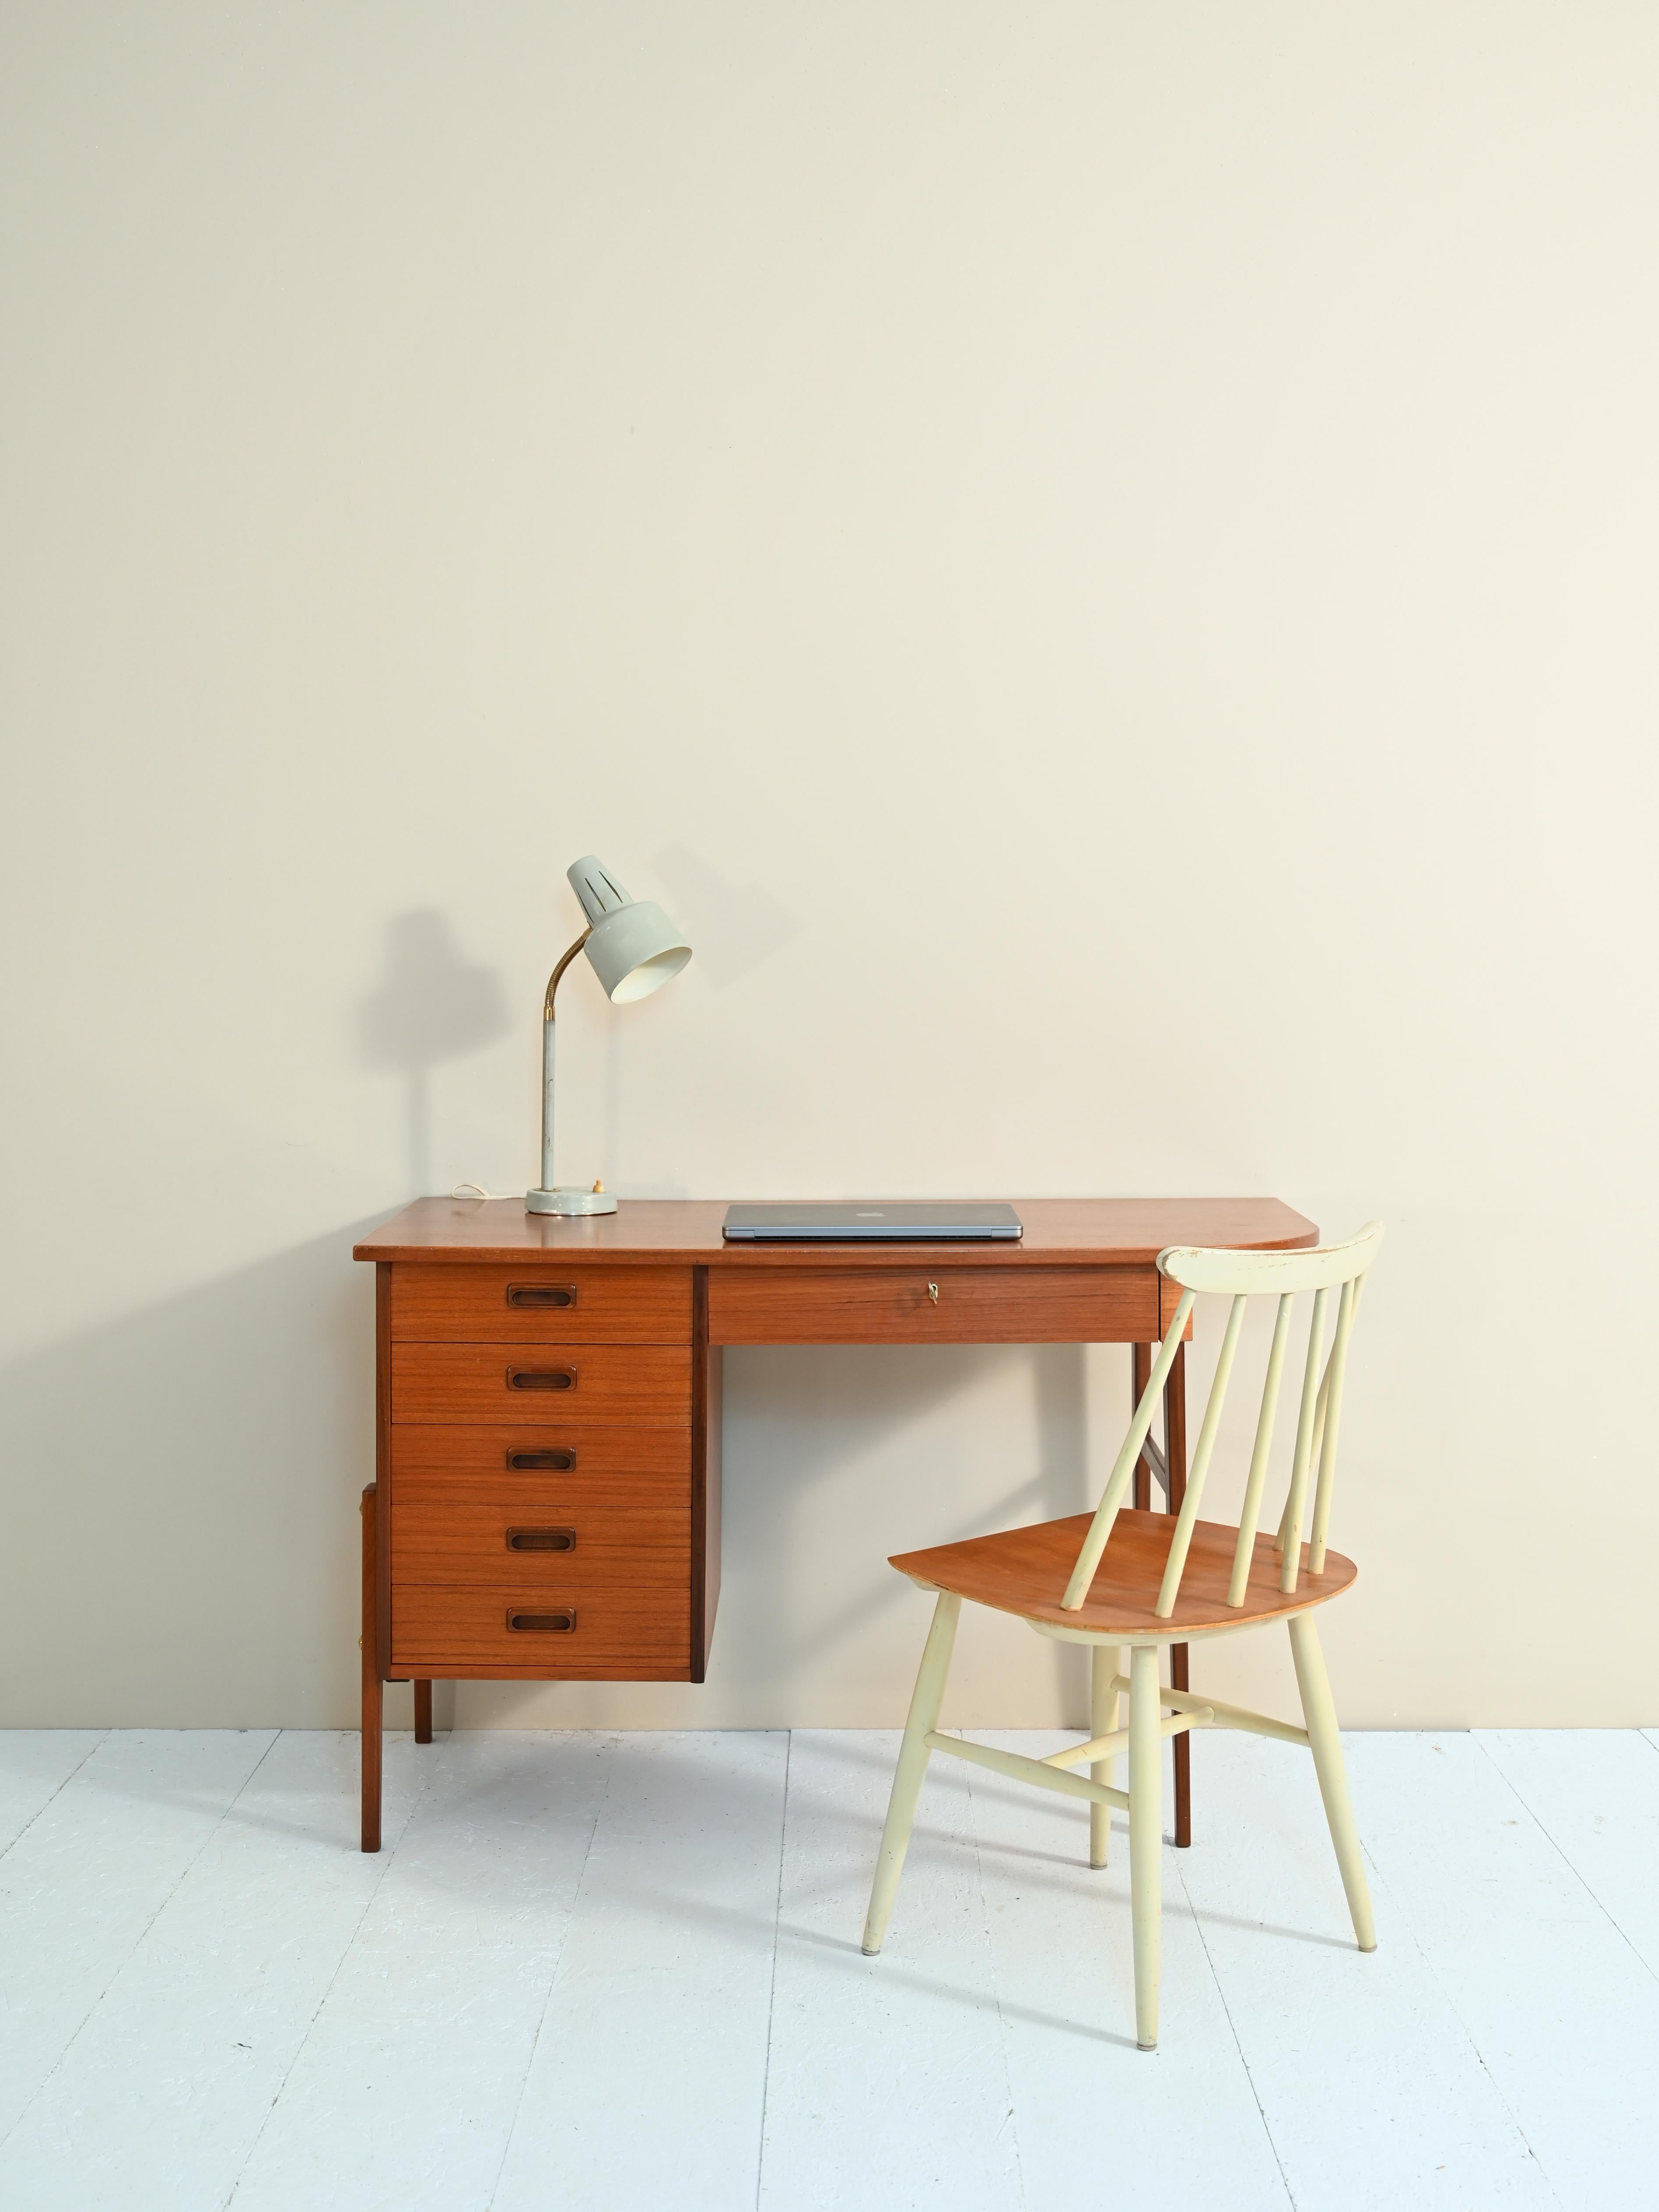 Mid-century teak desk equipped with drawers.

The regular structure features five drawers on one side and a lockable drawer on the other side.
 
The carved wood handle of the drawers as well as the fineness of the details are evidence of the